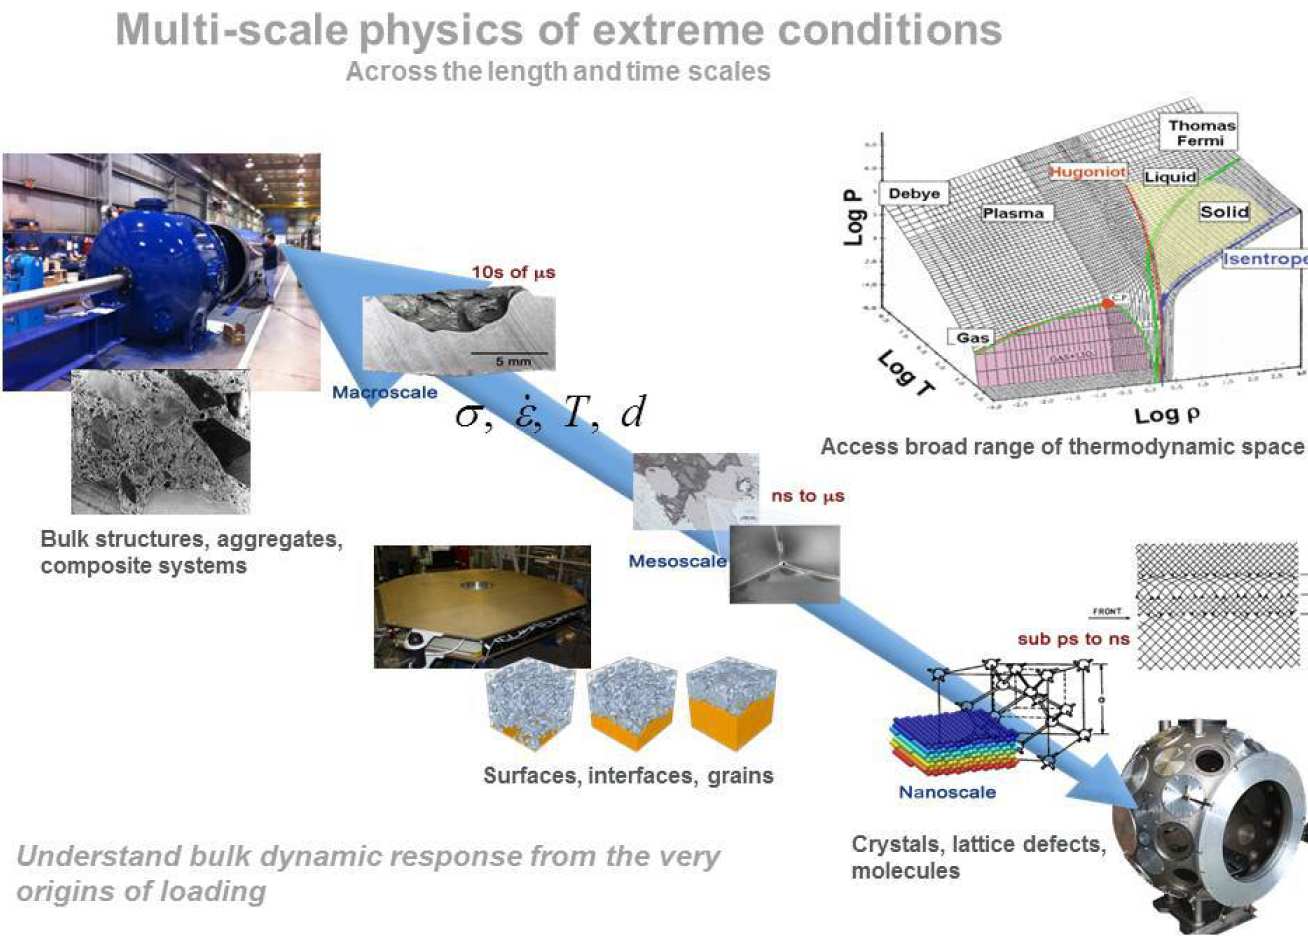 Multi-scale physics of extreme conditions